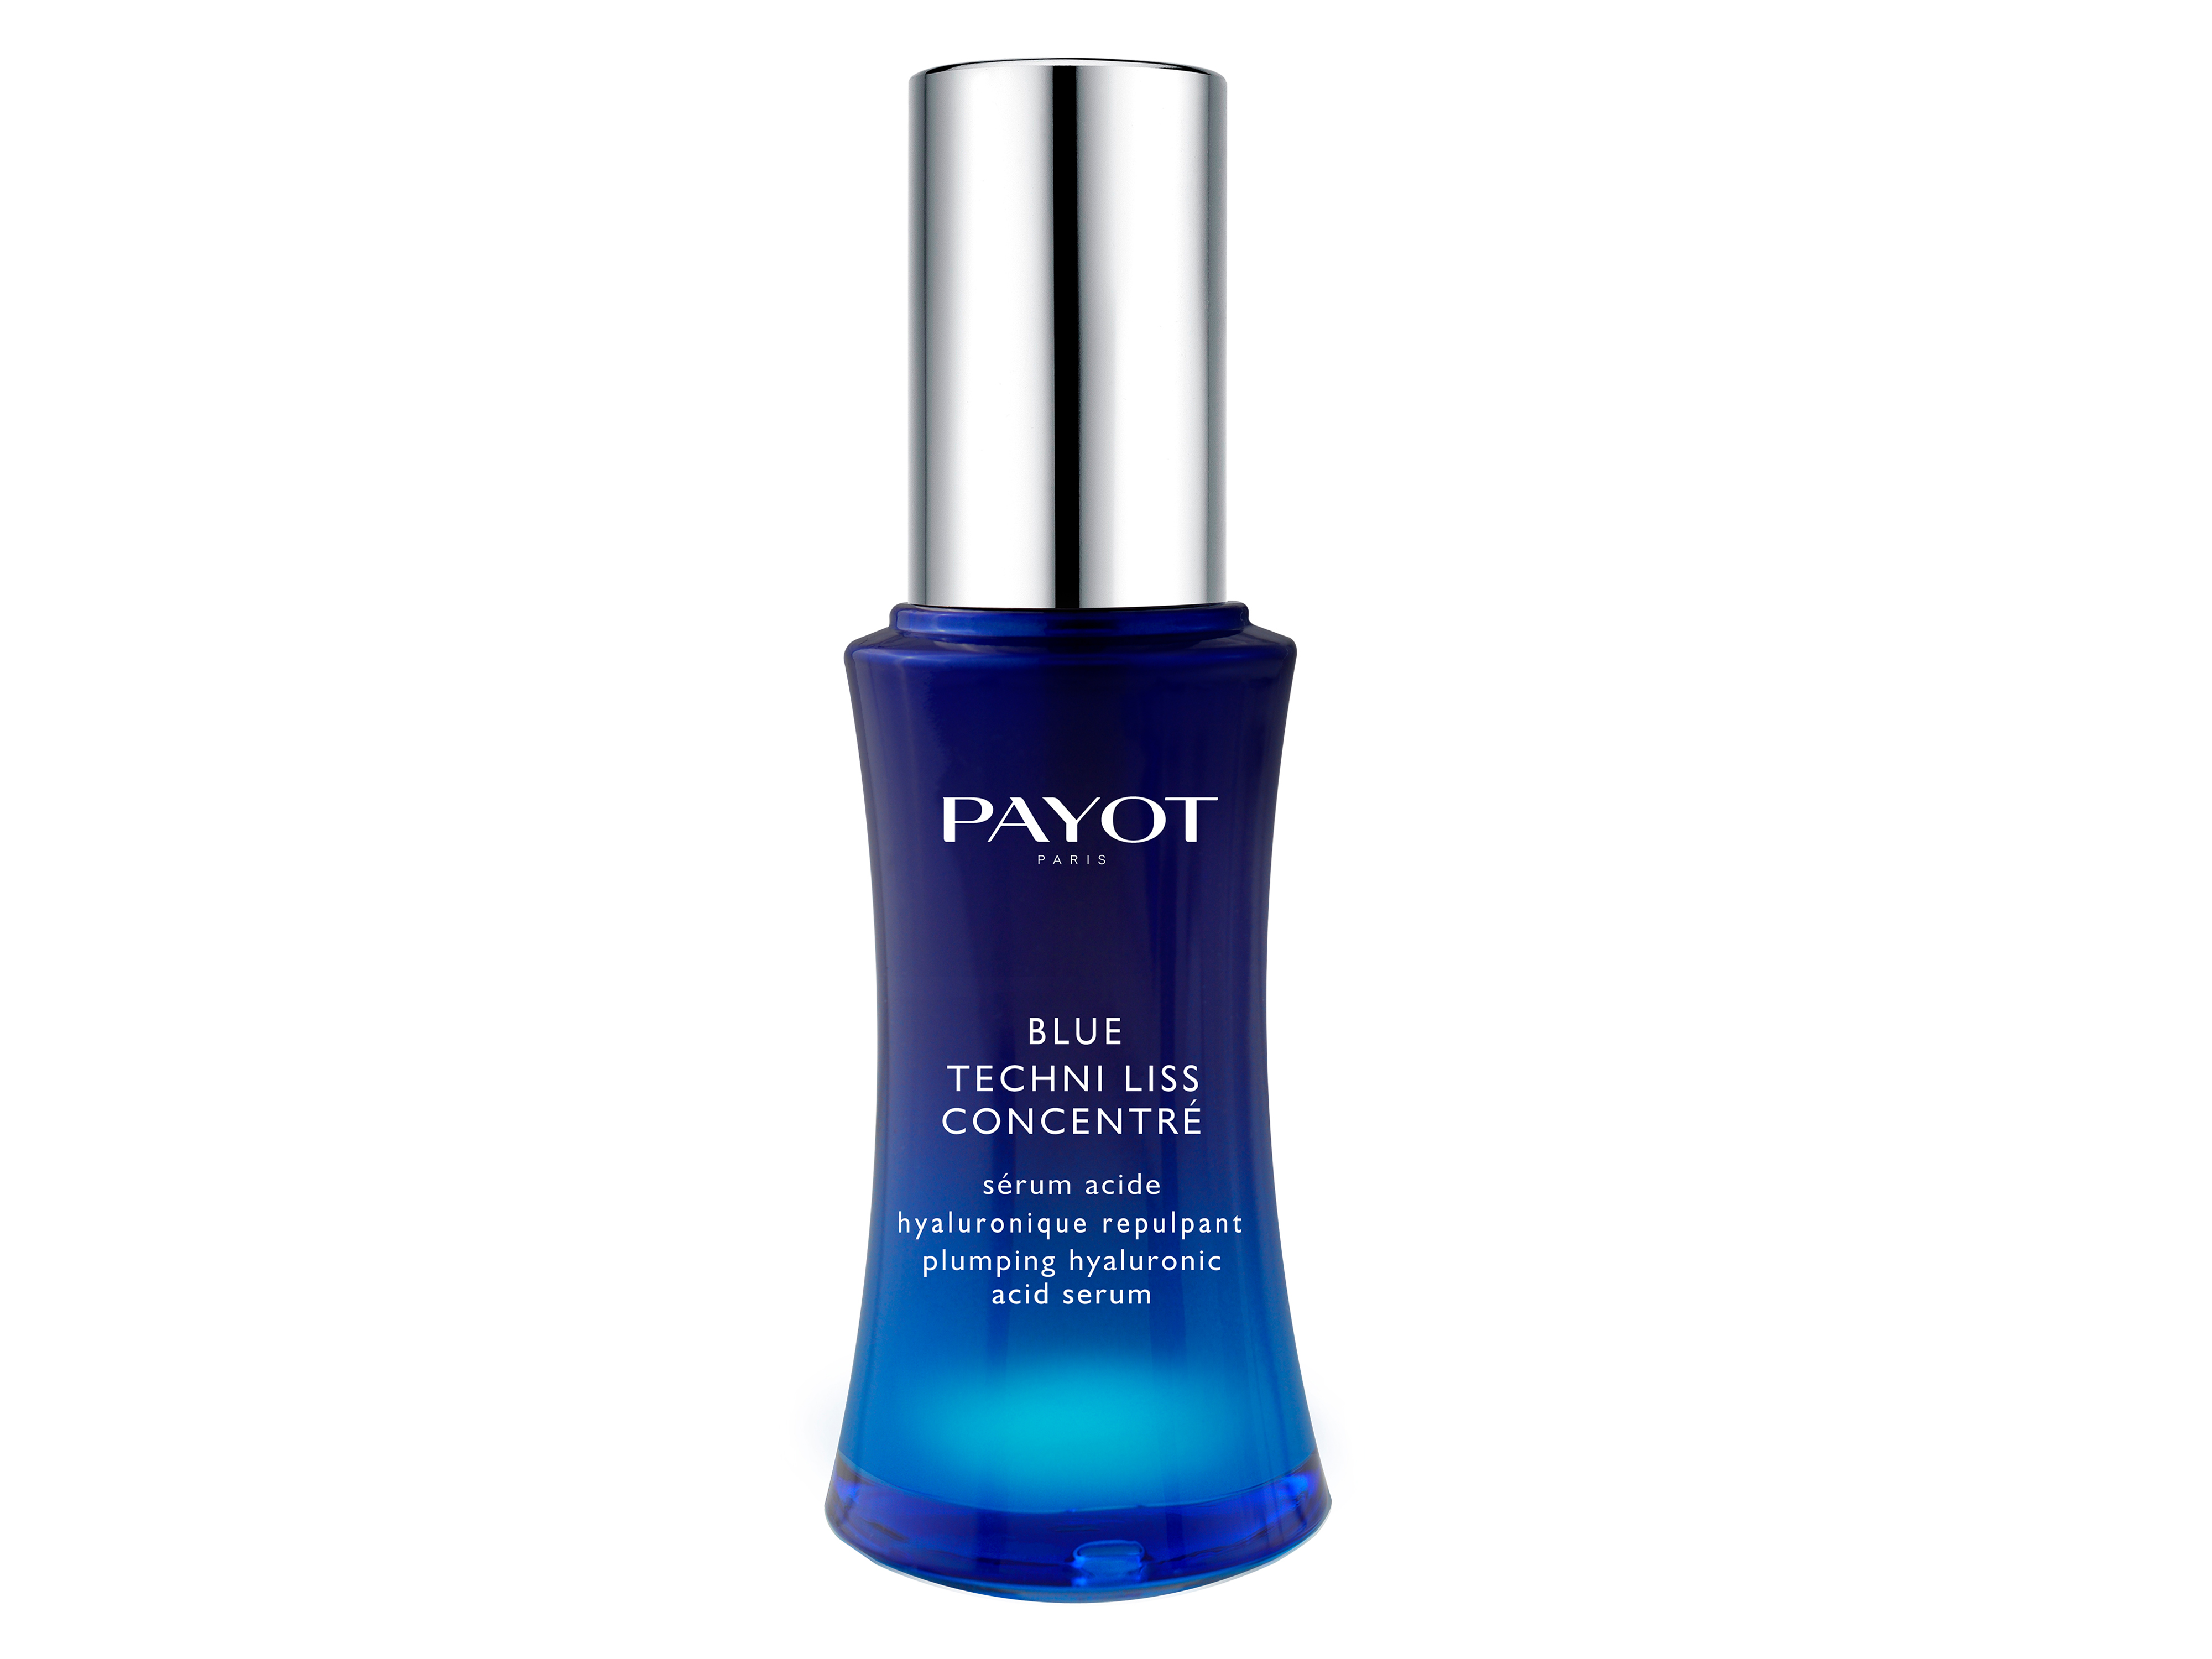 Payot Blue Techni Liss Concentre, 30 ml